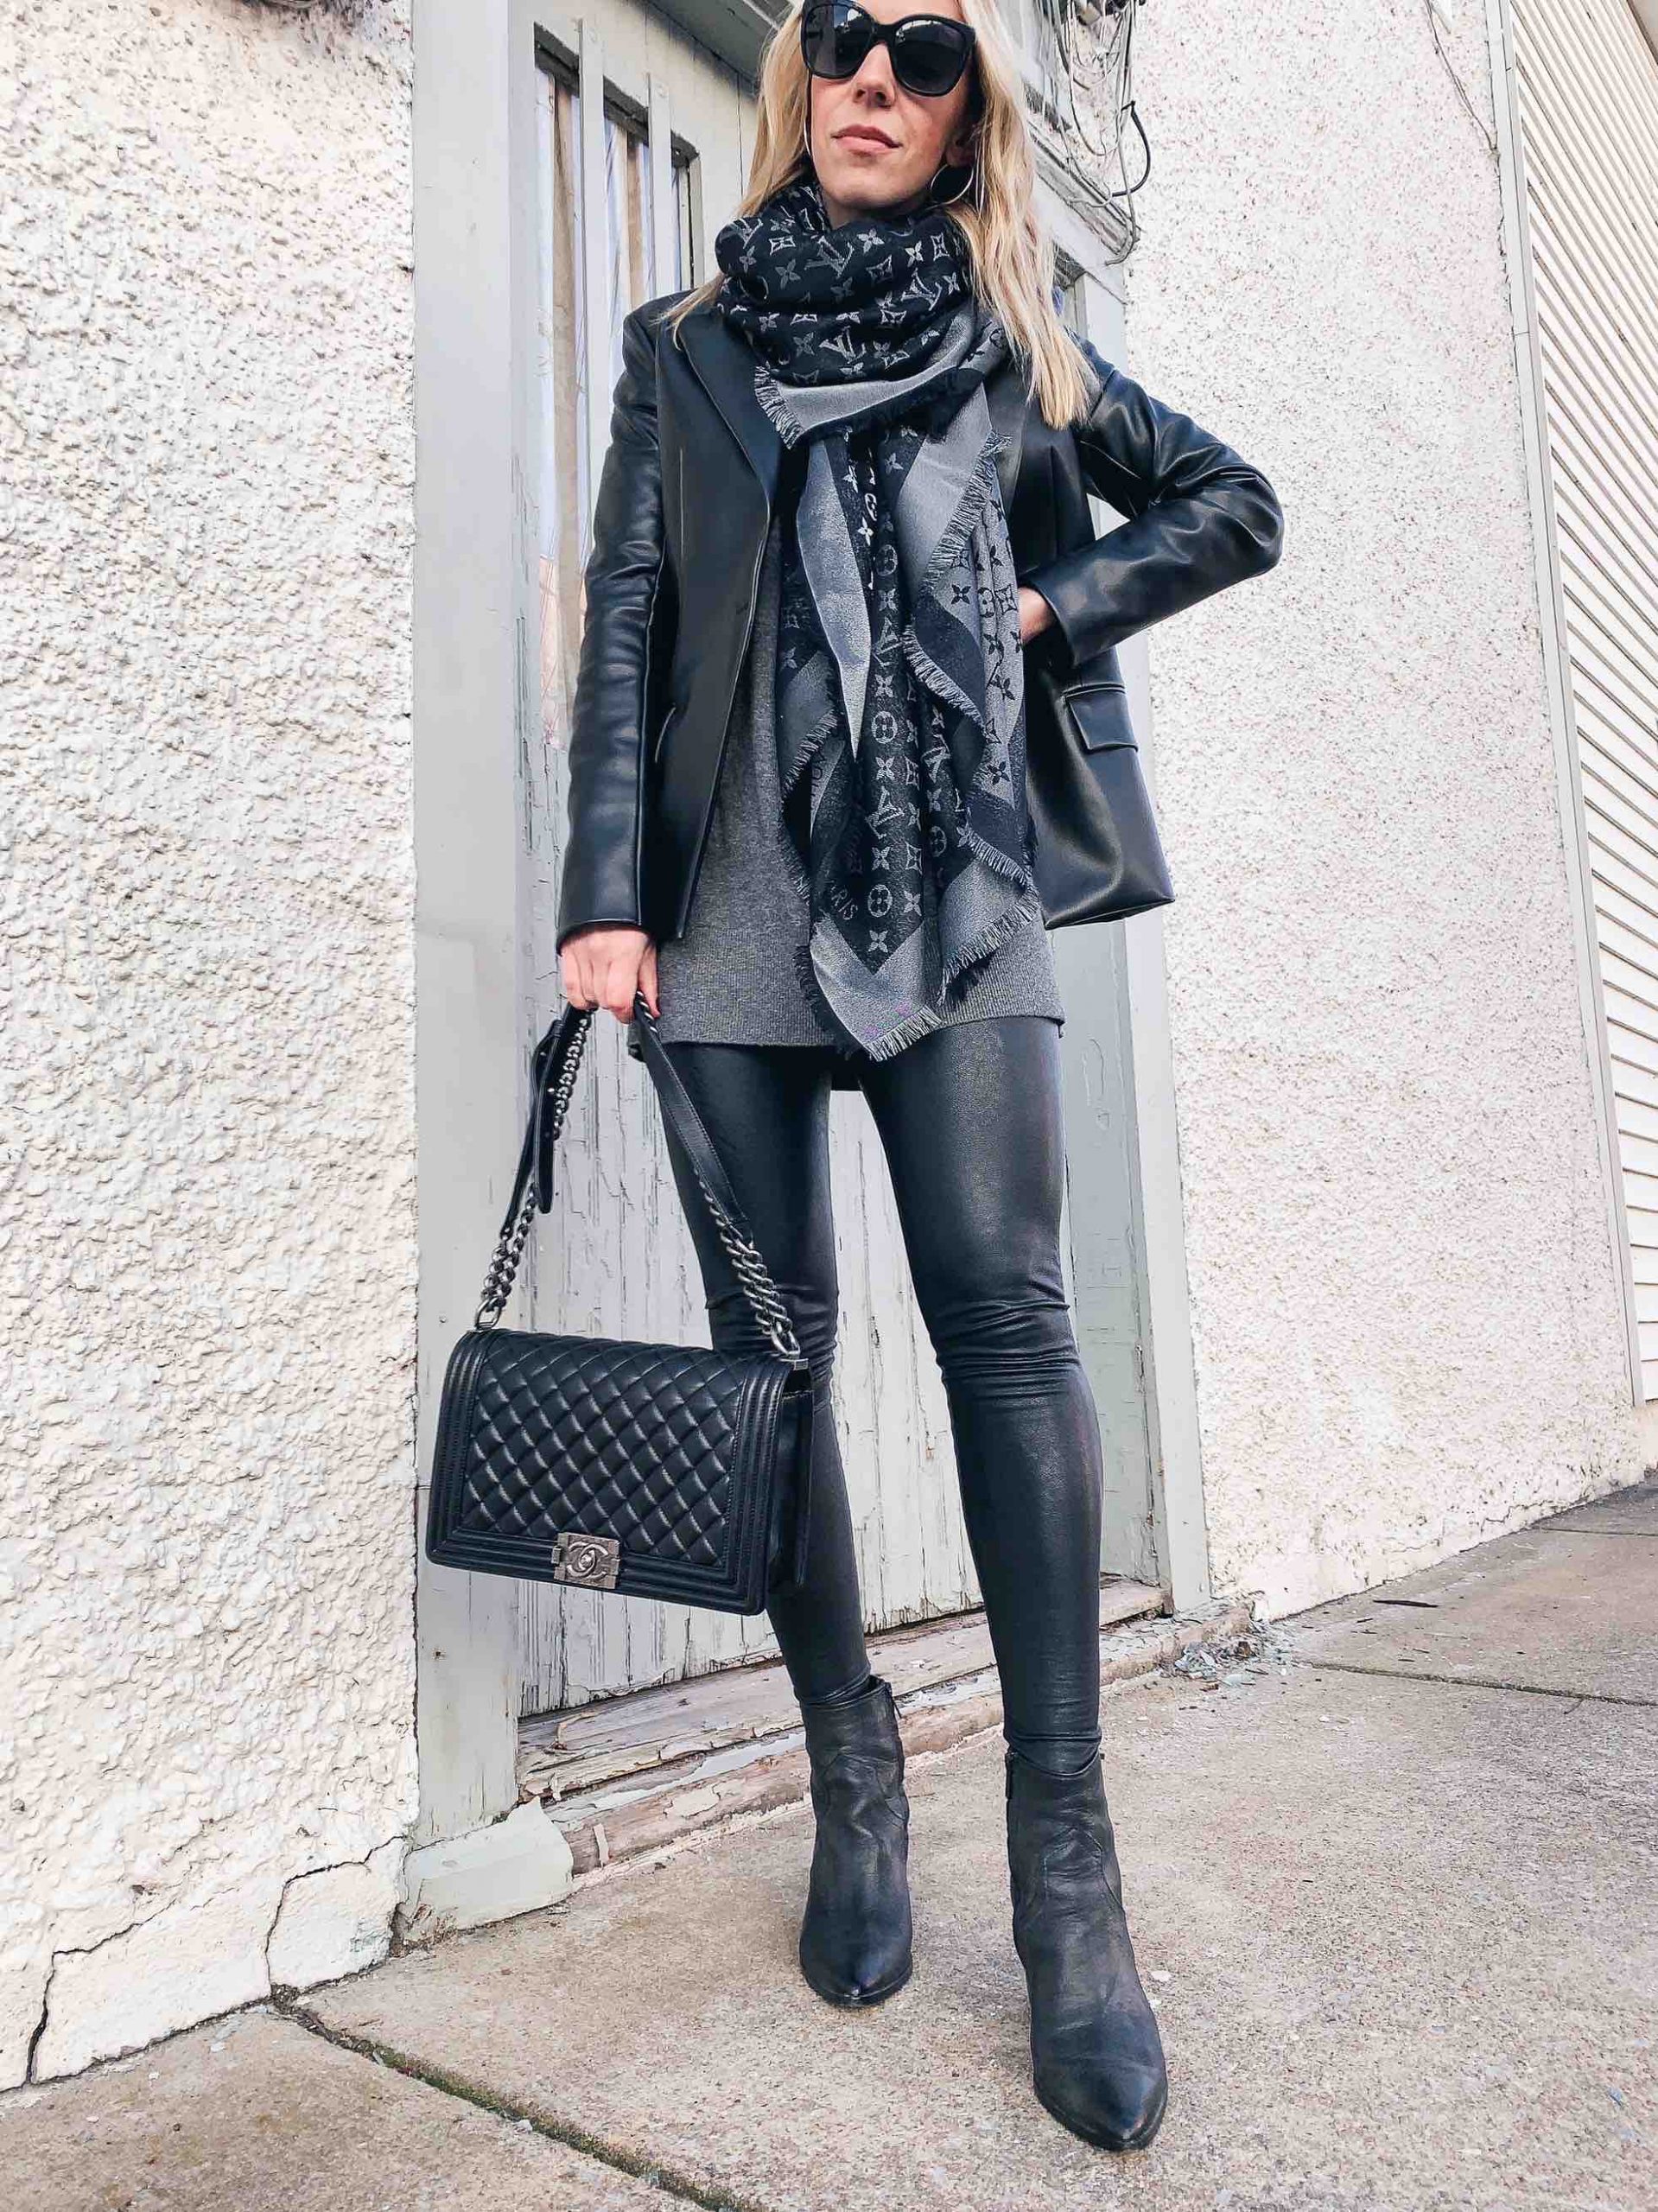 Black Leather Pants To Wear This Fall 2020  Outfits with leggings, Faux leather  leggings outfit, Leather leggings outfit